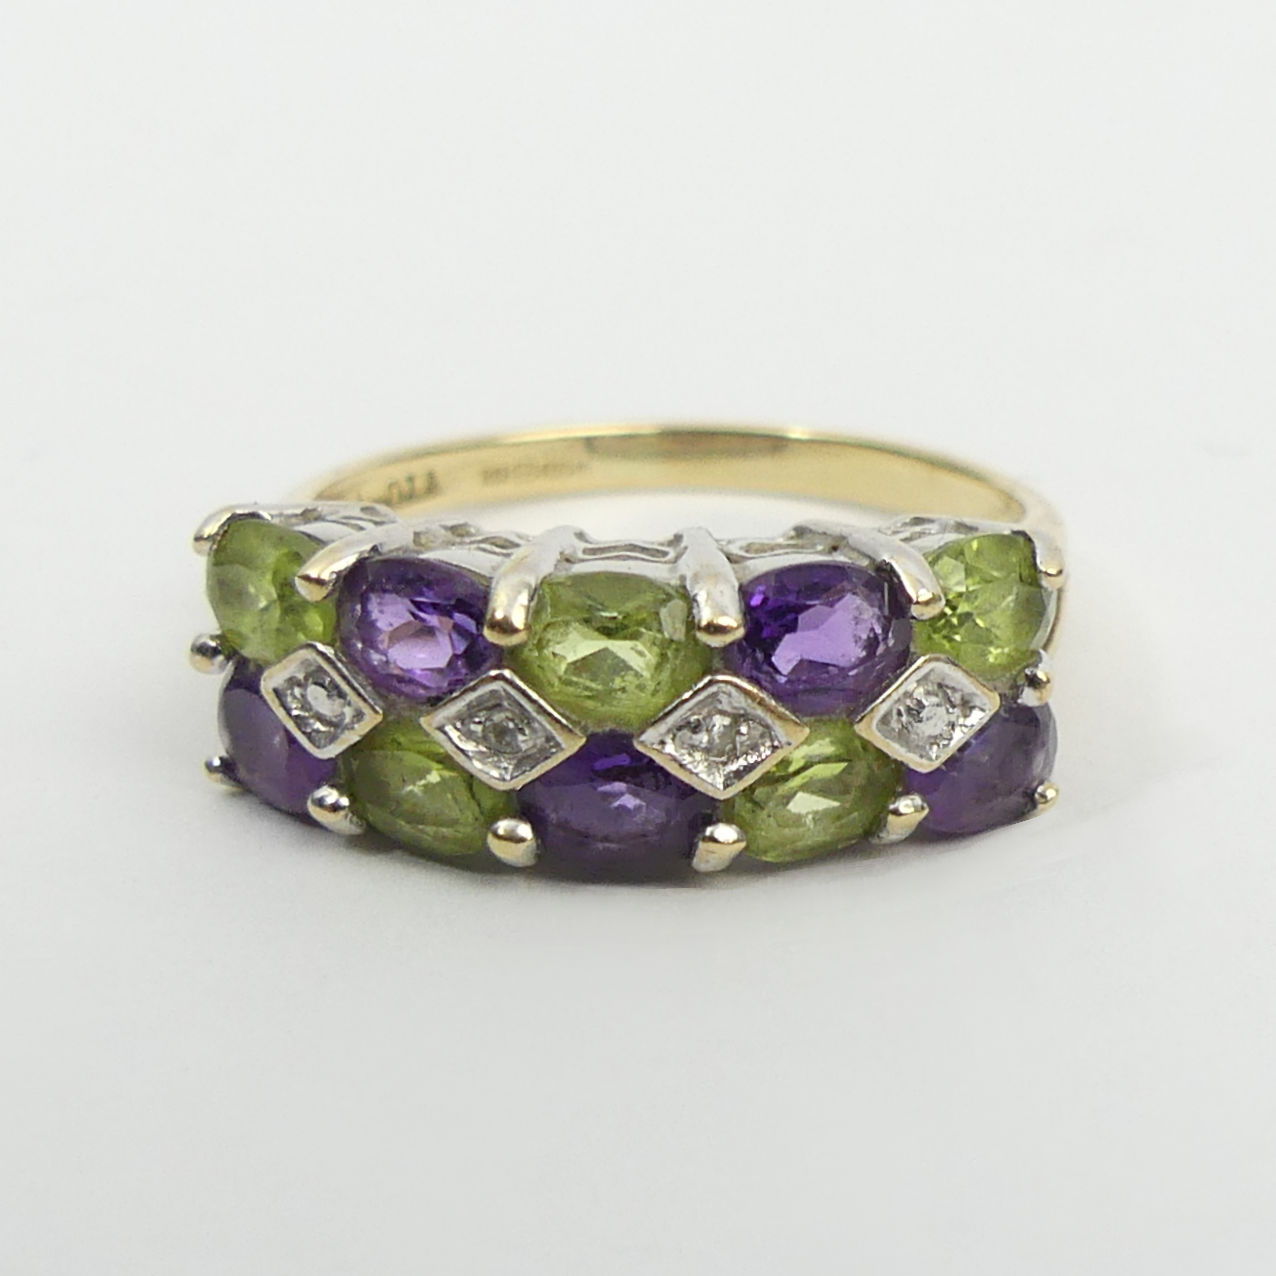 9ct gold peridot, amethyst and diamond ring, 2.4 grams, 6.6mm, size M 1/2. UK Postage £12. - Image 2 of 6